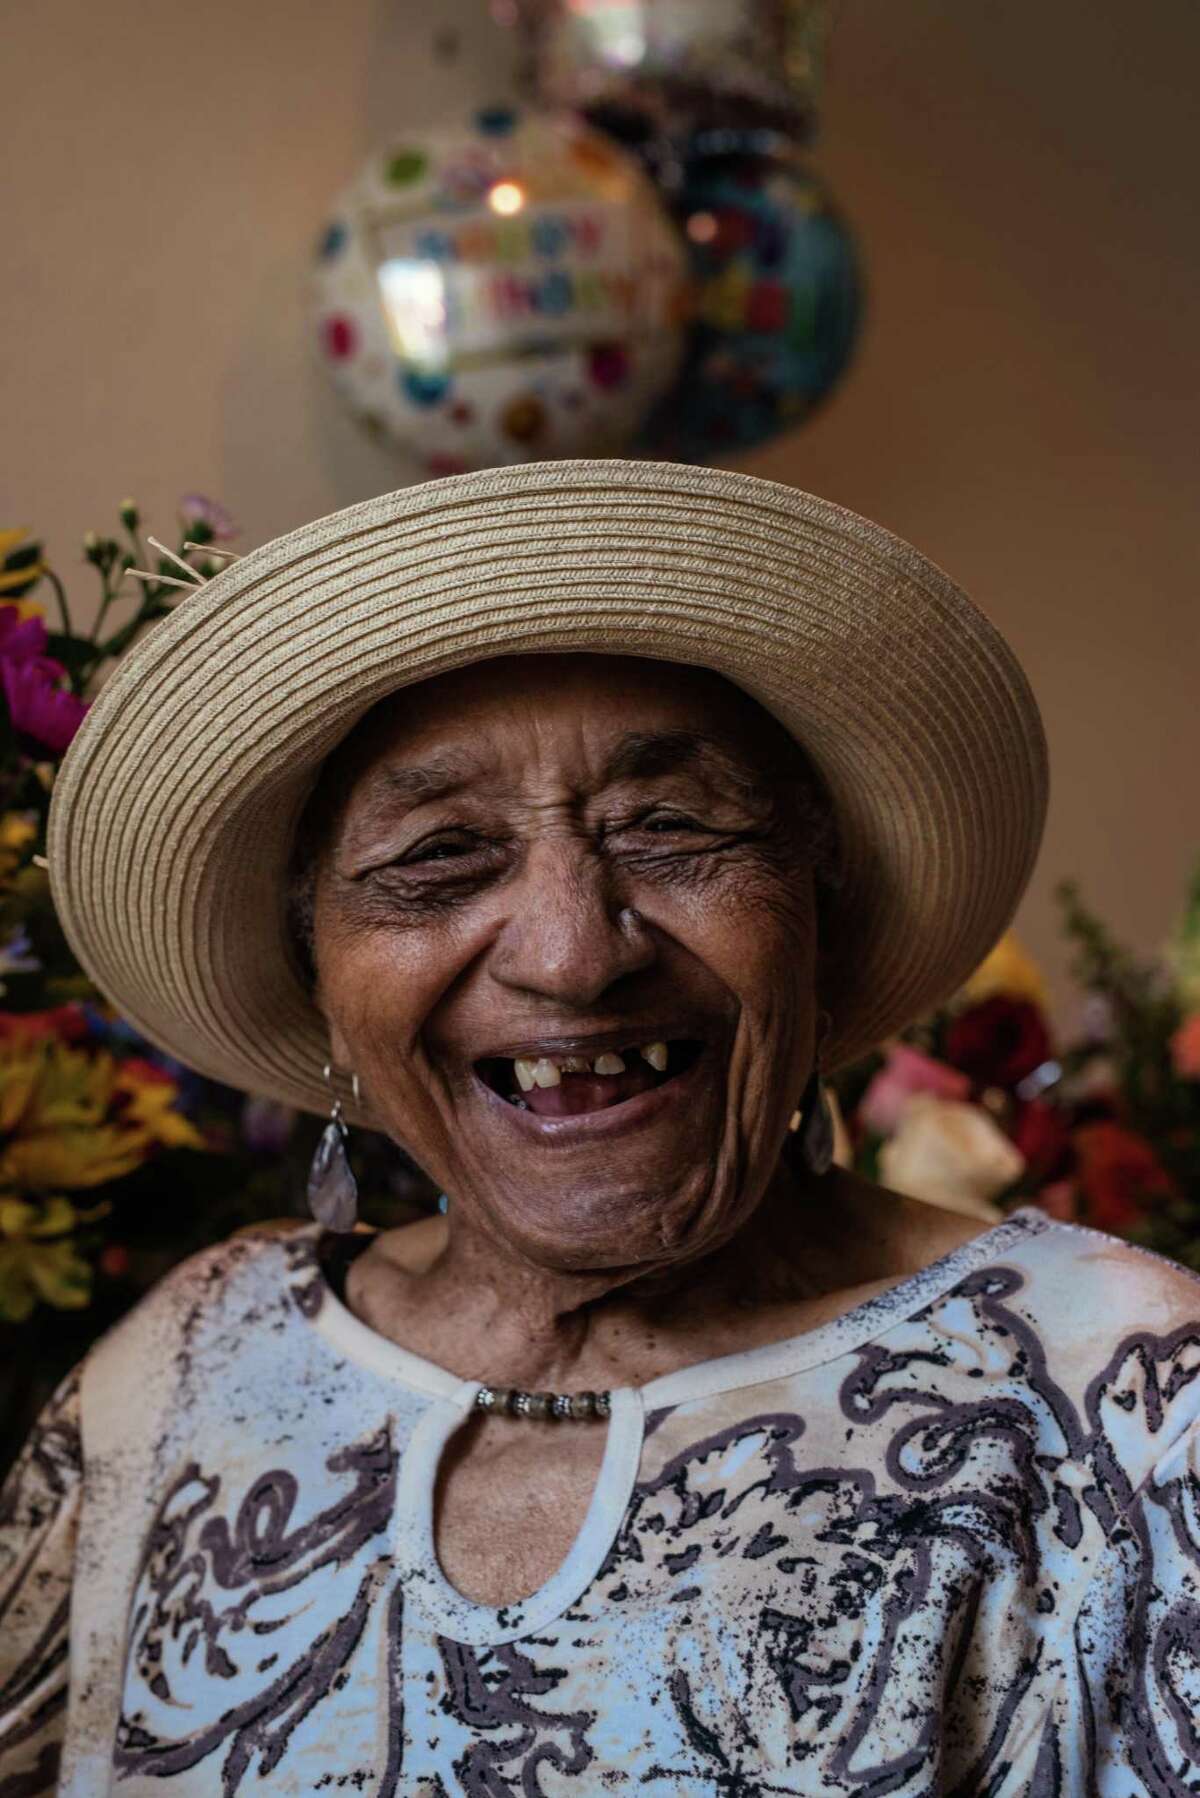 Georgia Mitchell turned 103 years old Saturday, July 8 and celebrated her birthday at her family's home in Atascocita.